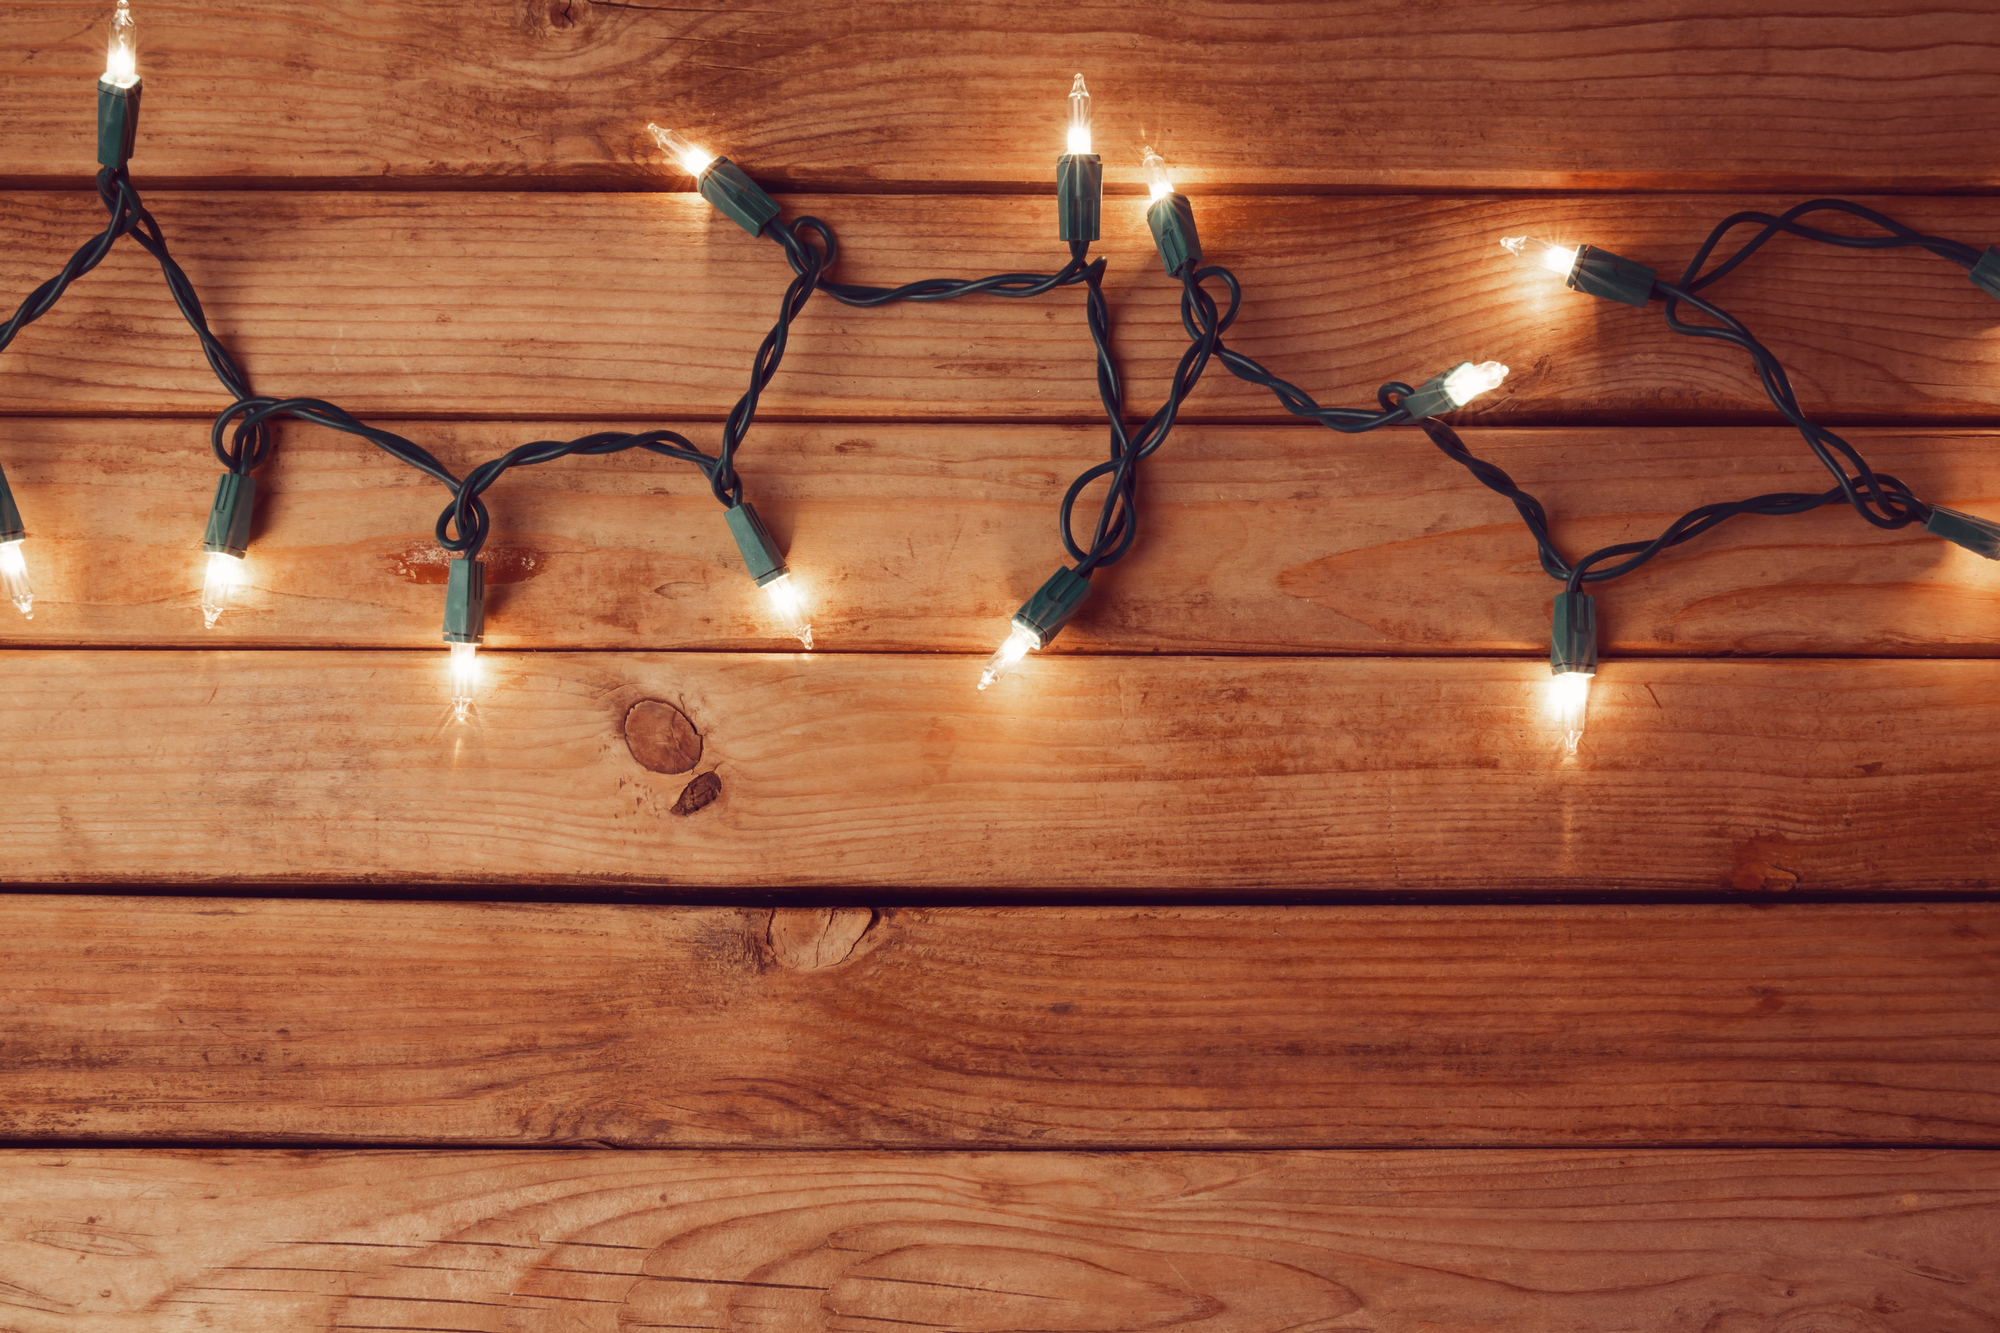 efficient lighting reduces energy costs (especially around the holidays)